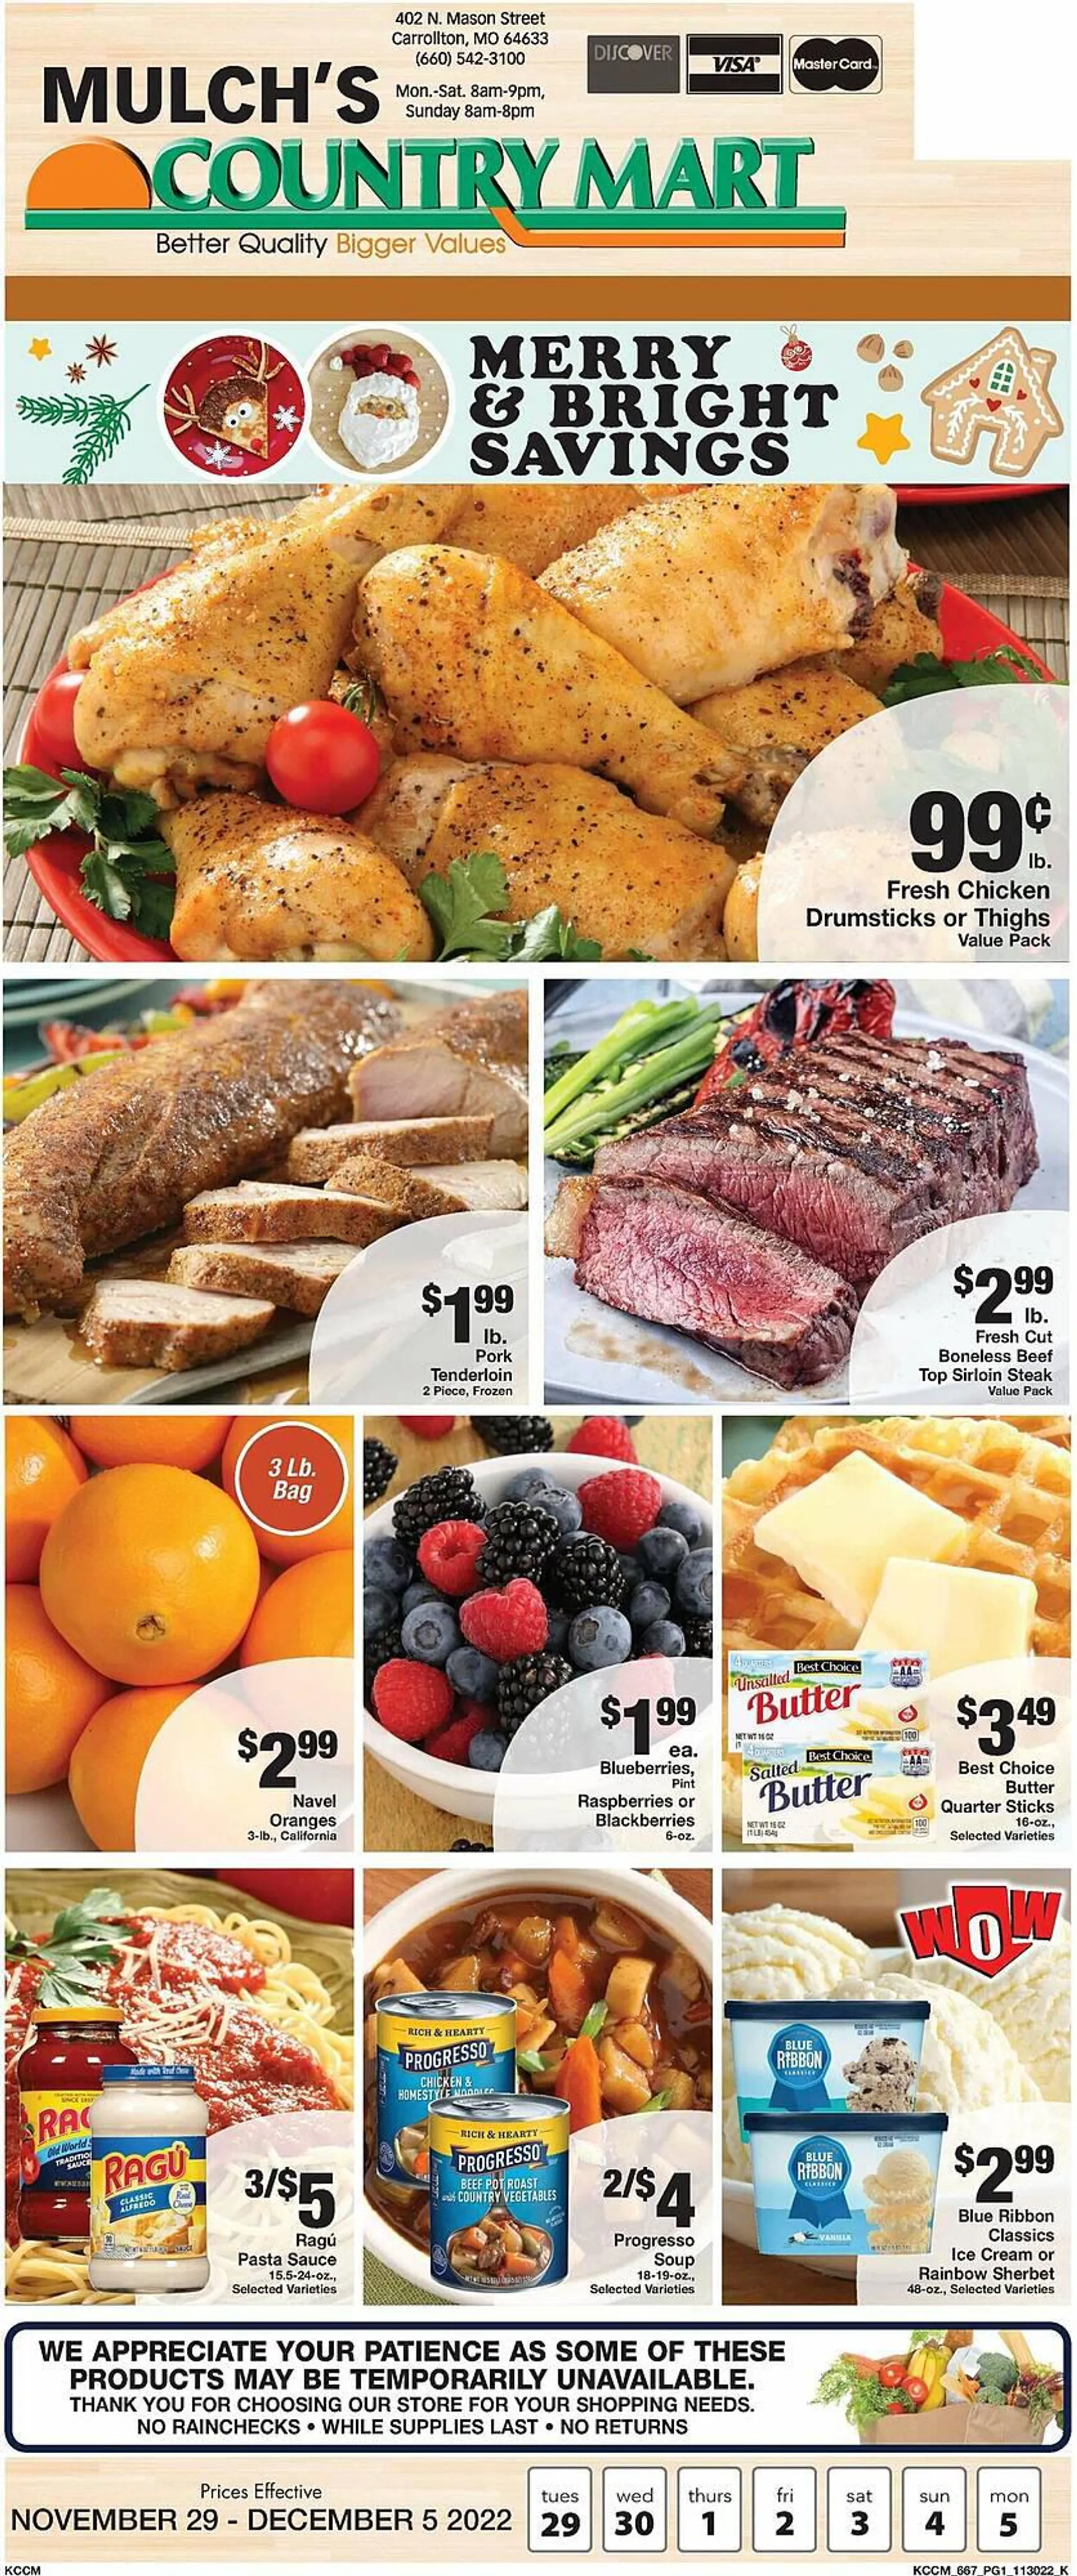 County Market Weekly Ad - 1